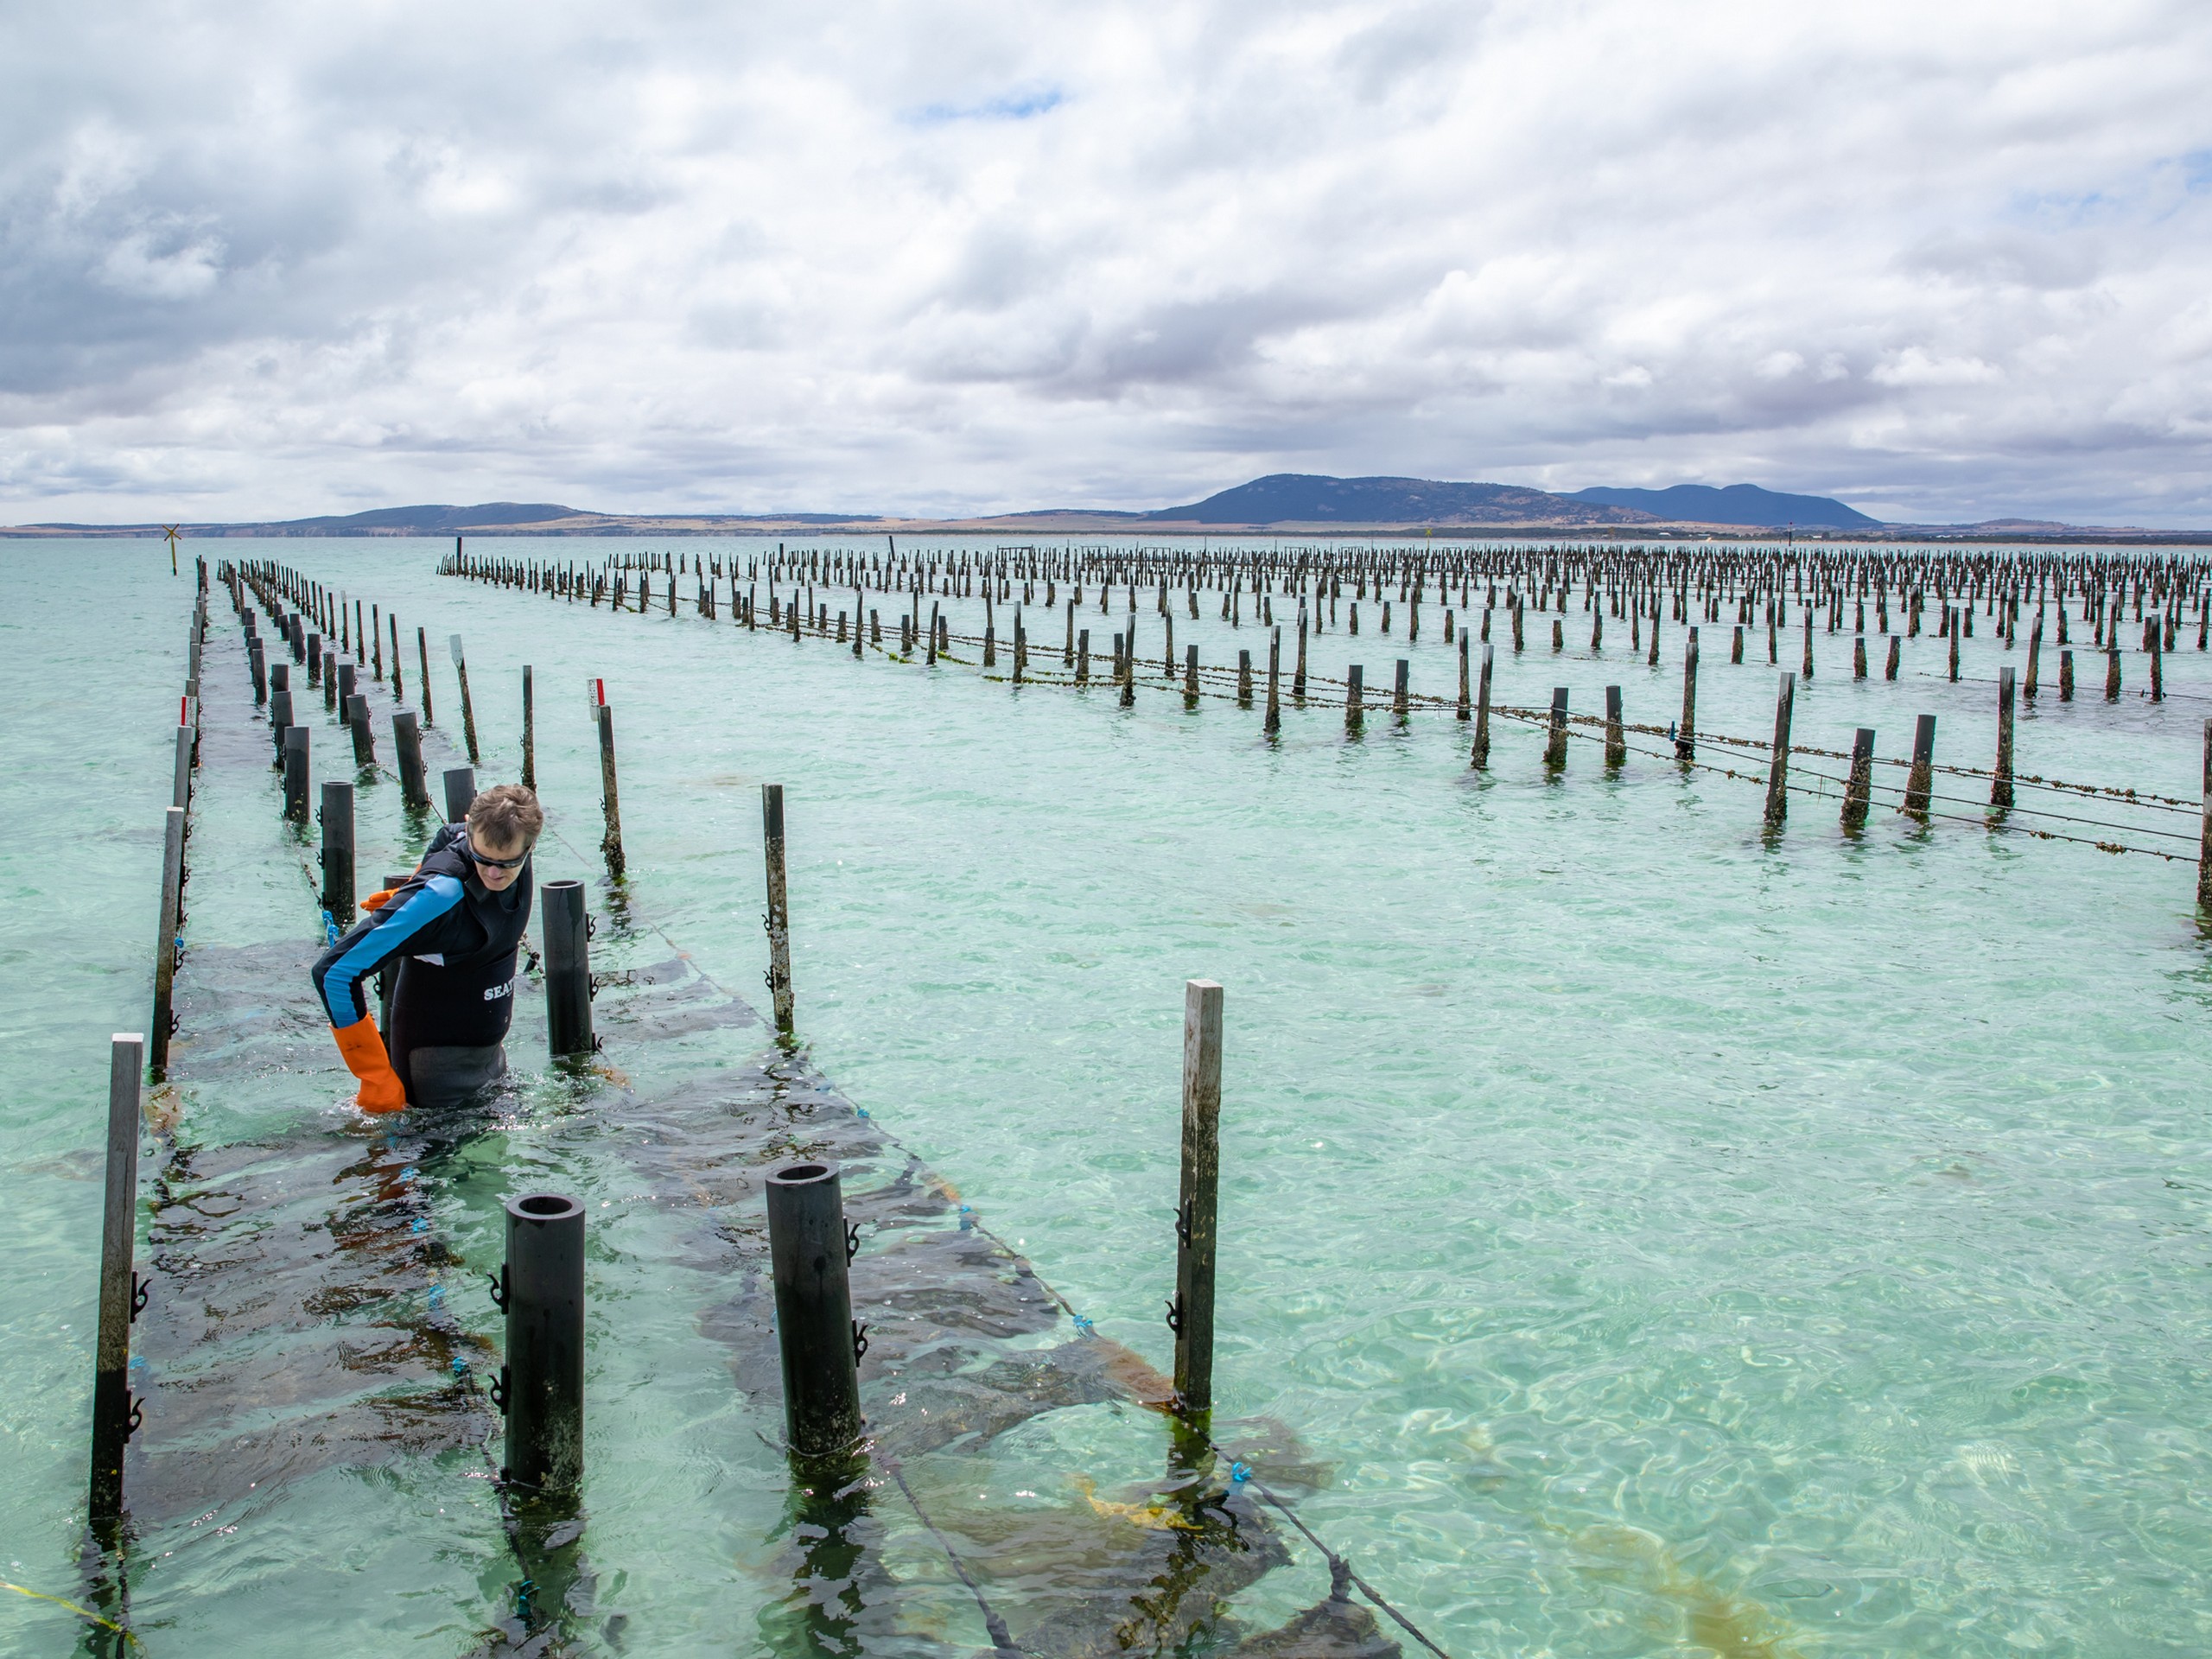 Visiting the Oyster Farm while in Coffin Bay